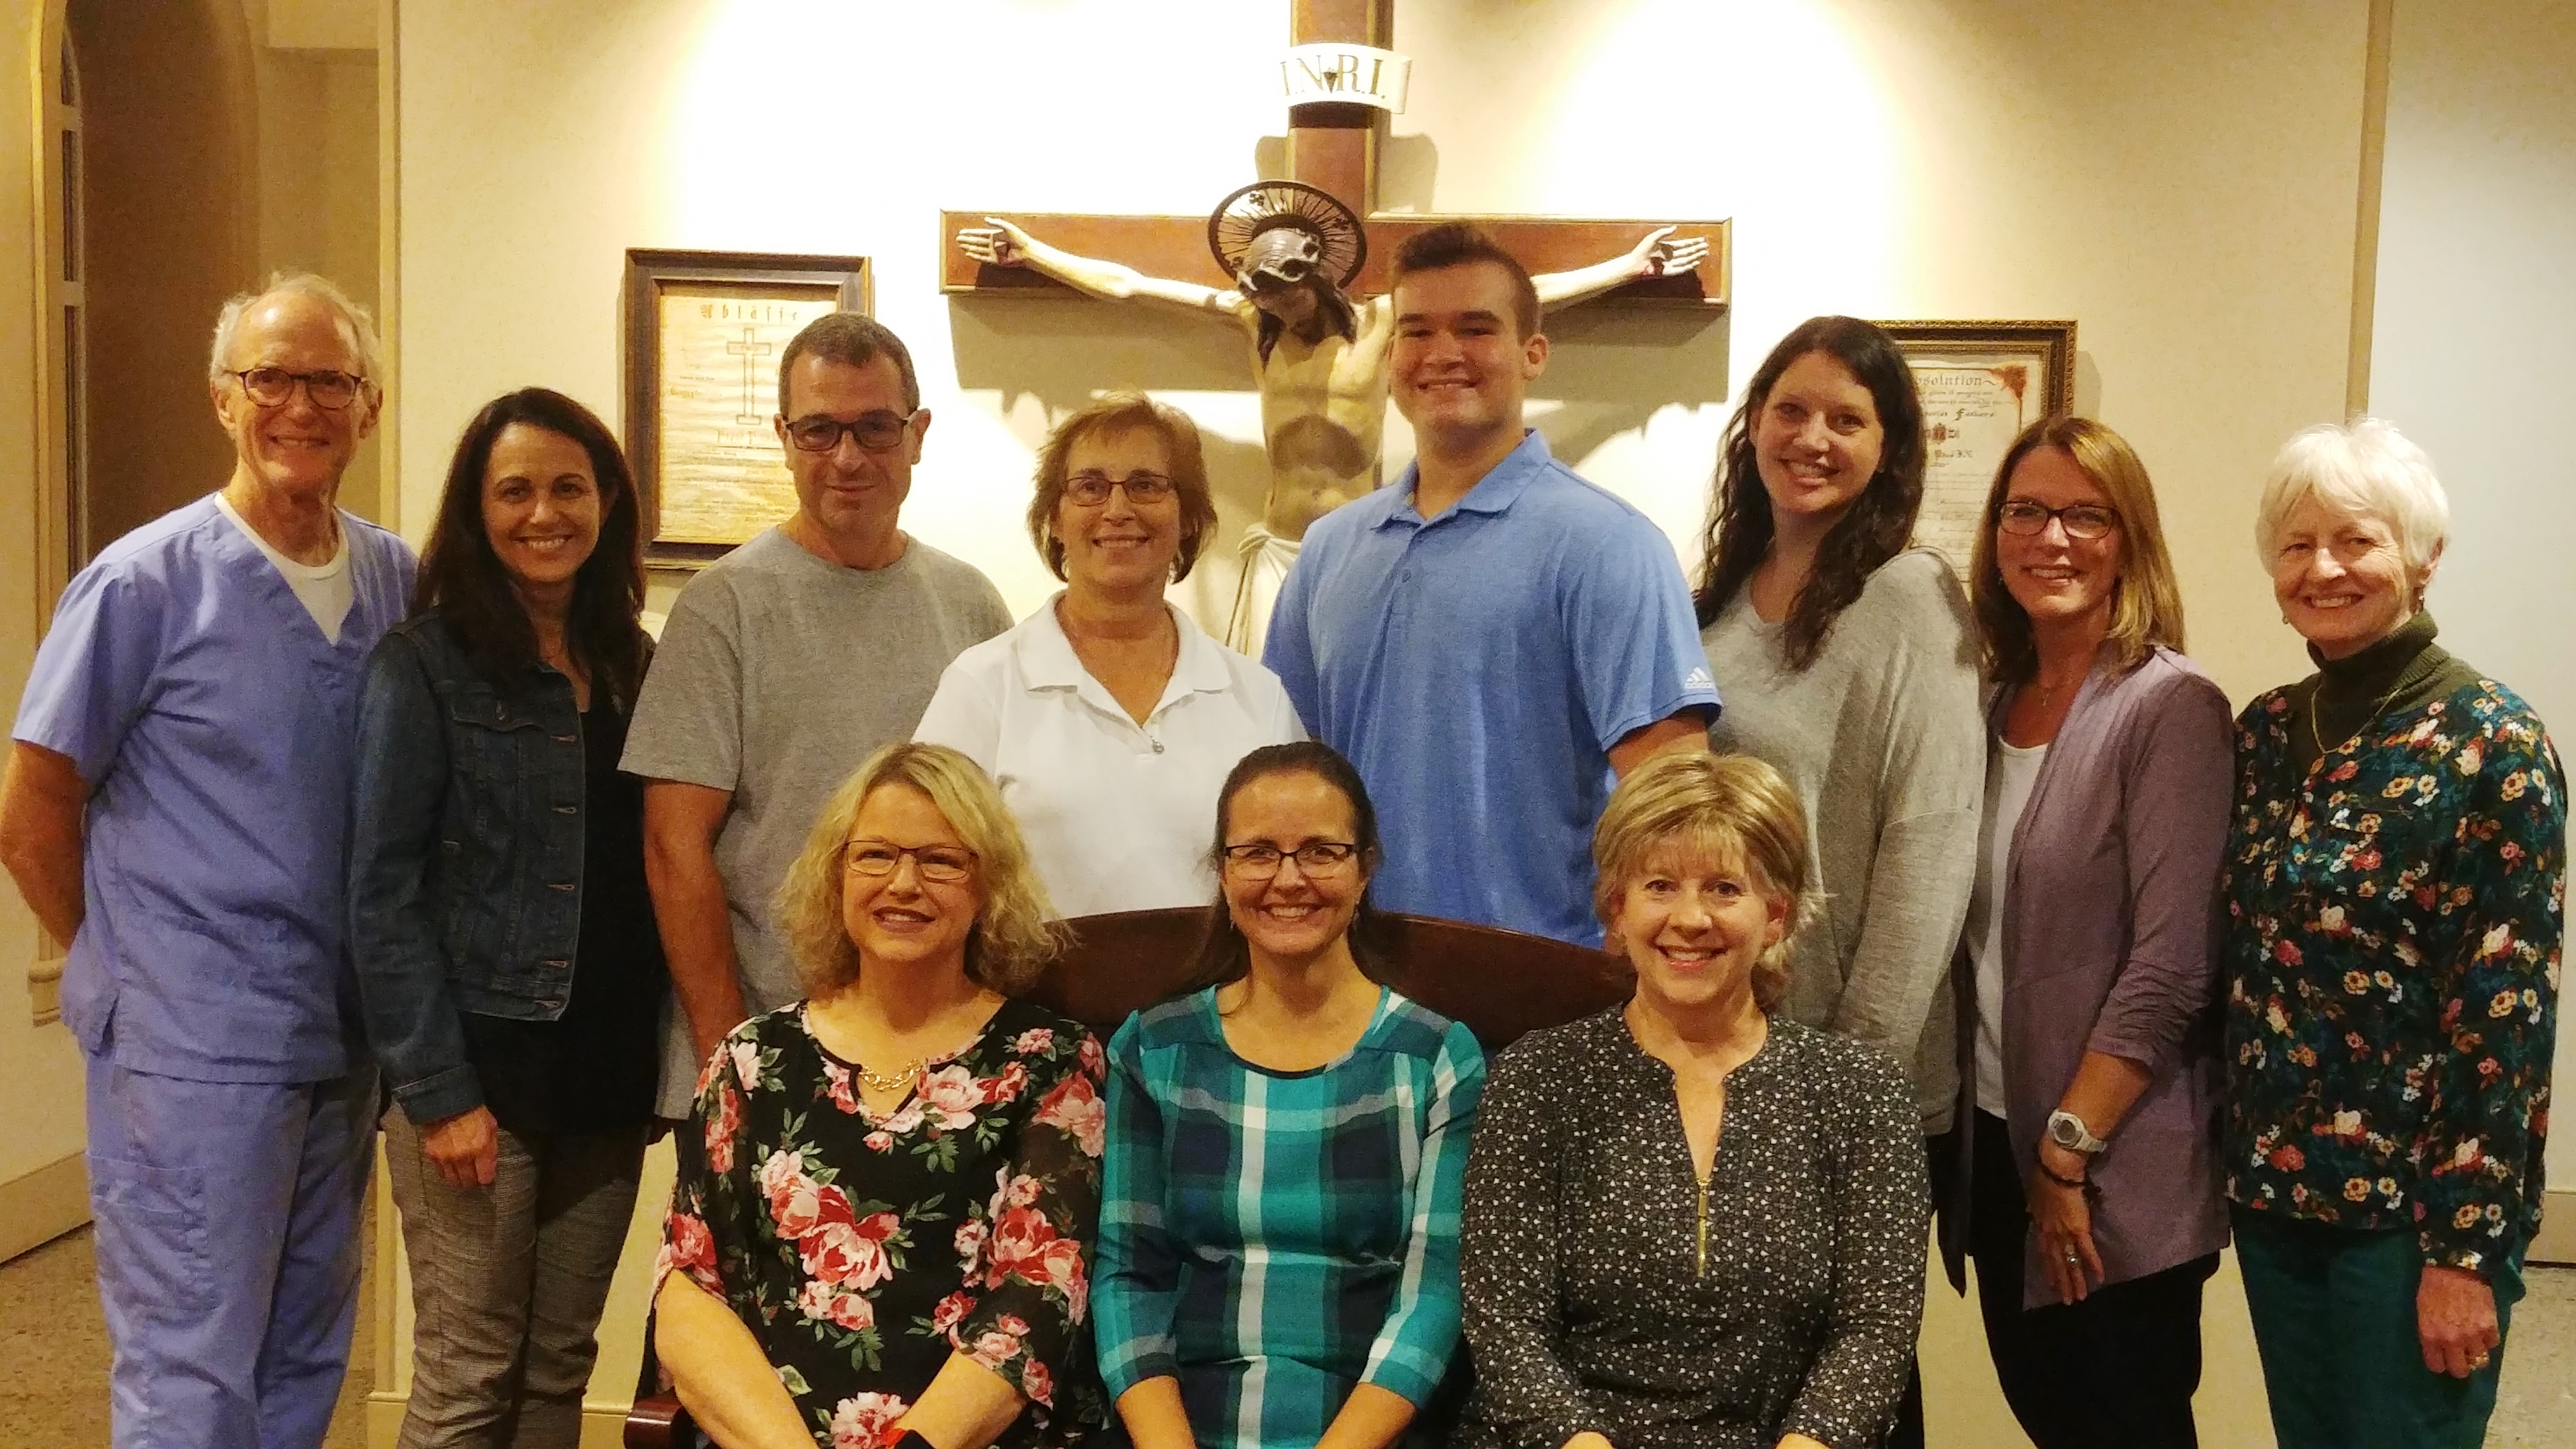 Group of people standing in front of large crucifix